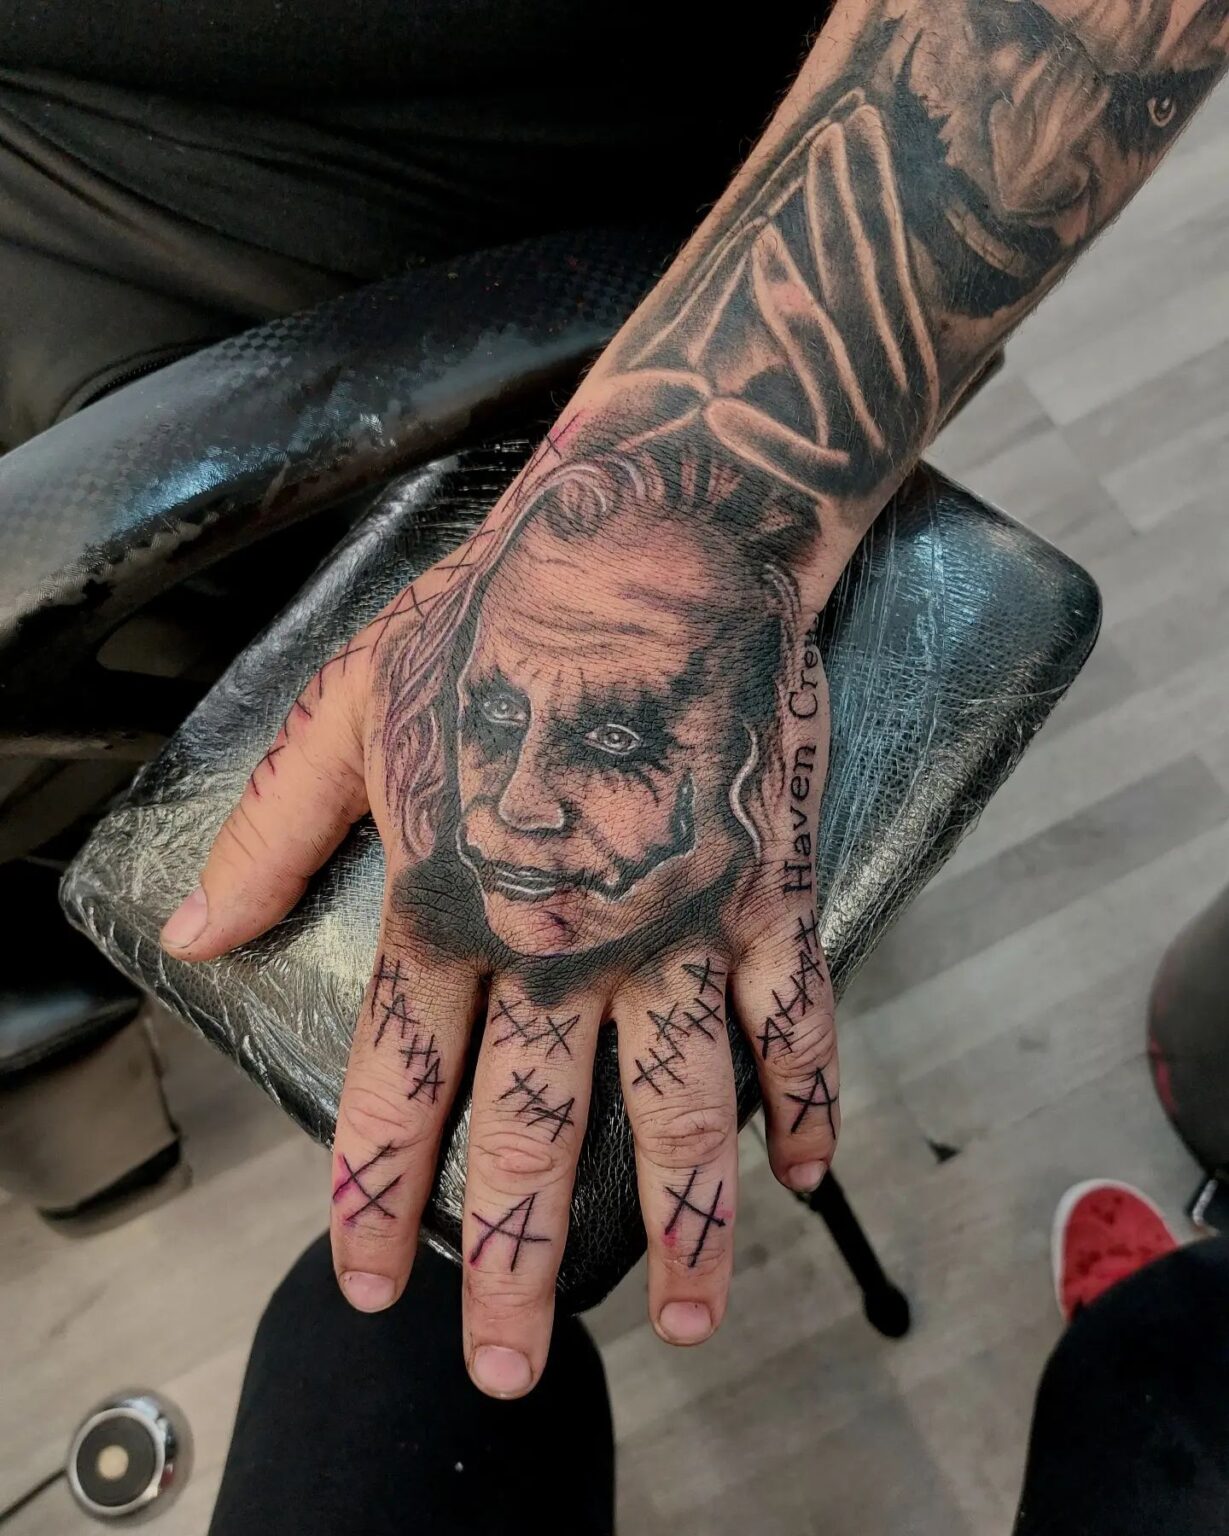 20+ Joker Hand Tattoo Ideas You Have To See To Believe! - Outsons